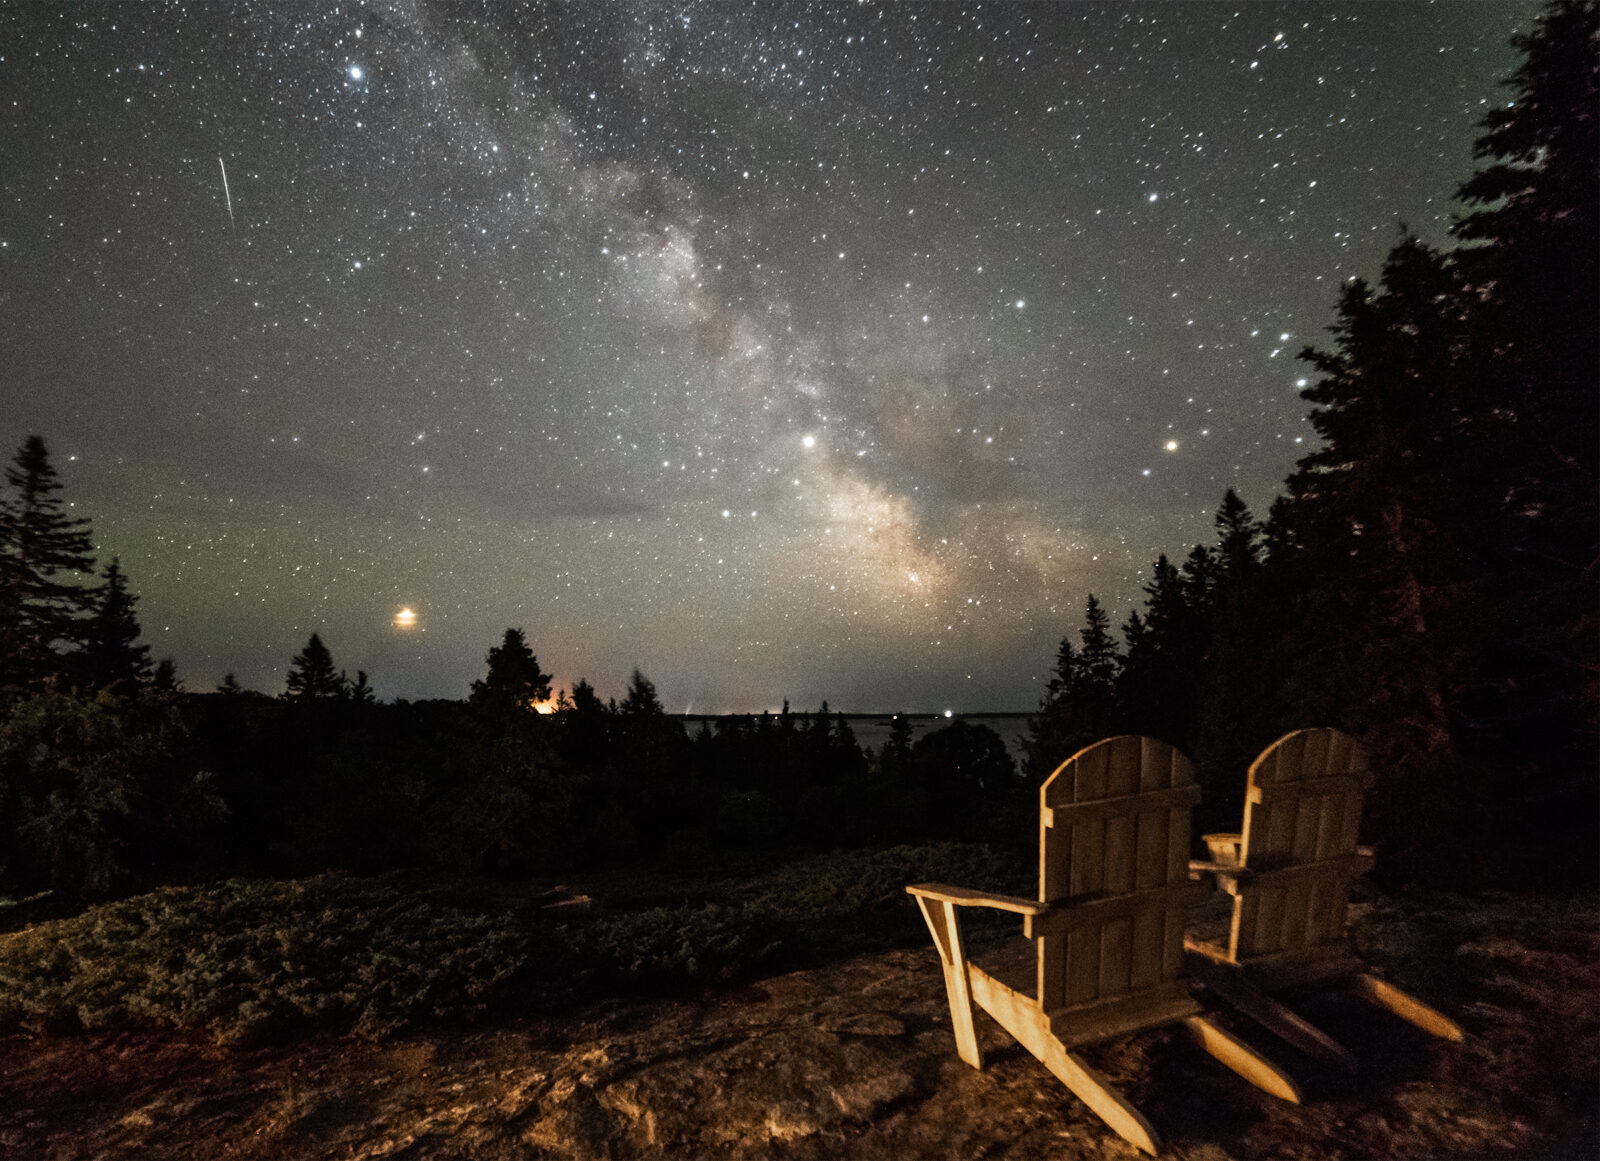 An image of two chairs looking at the swirling galaxy of stars seen in the night sky